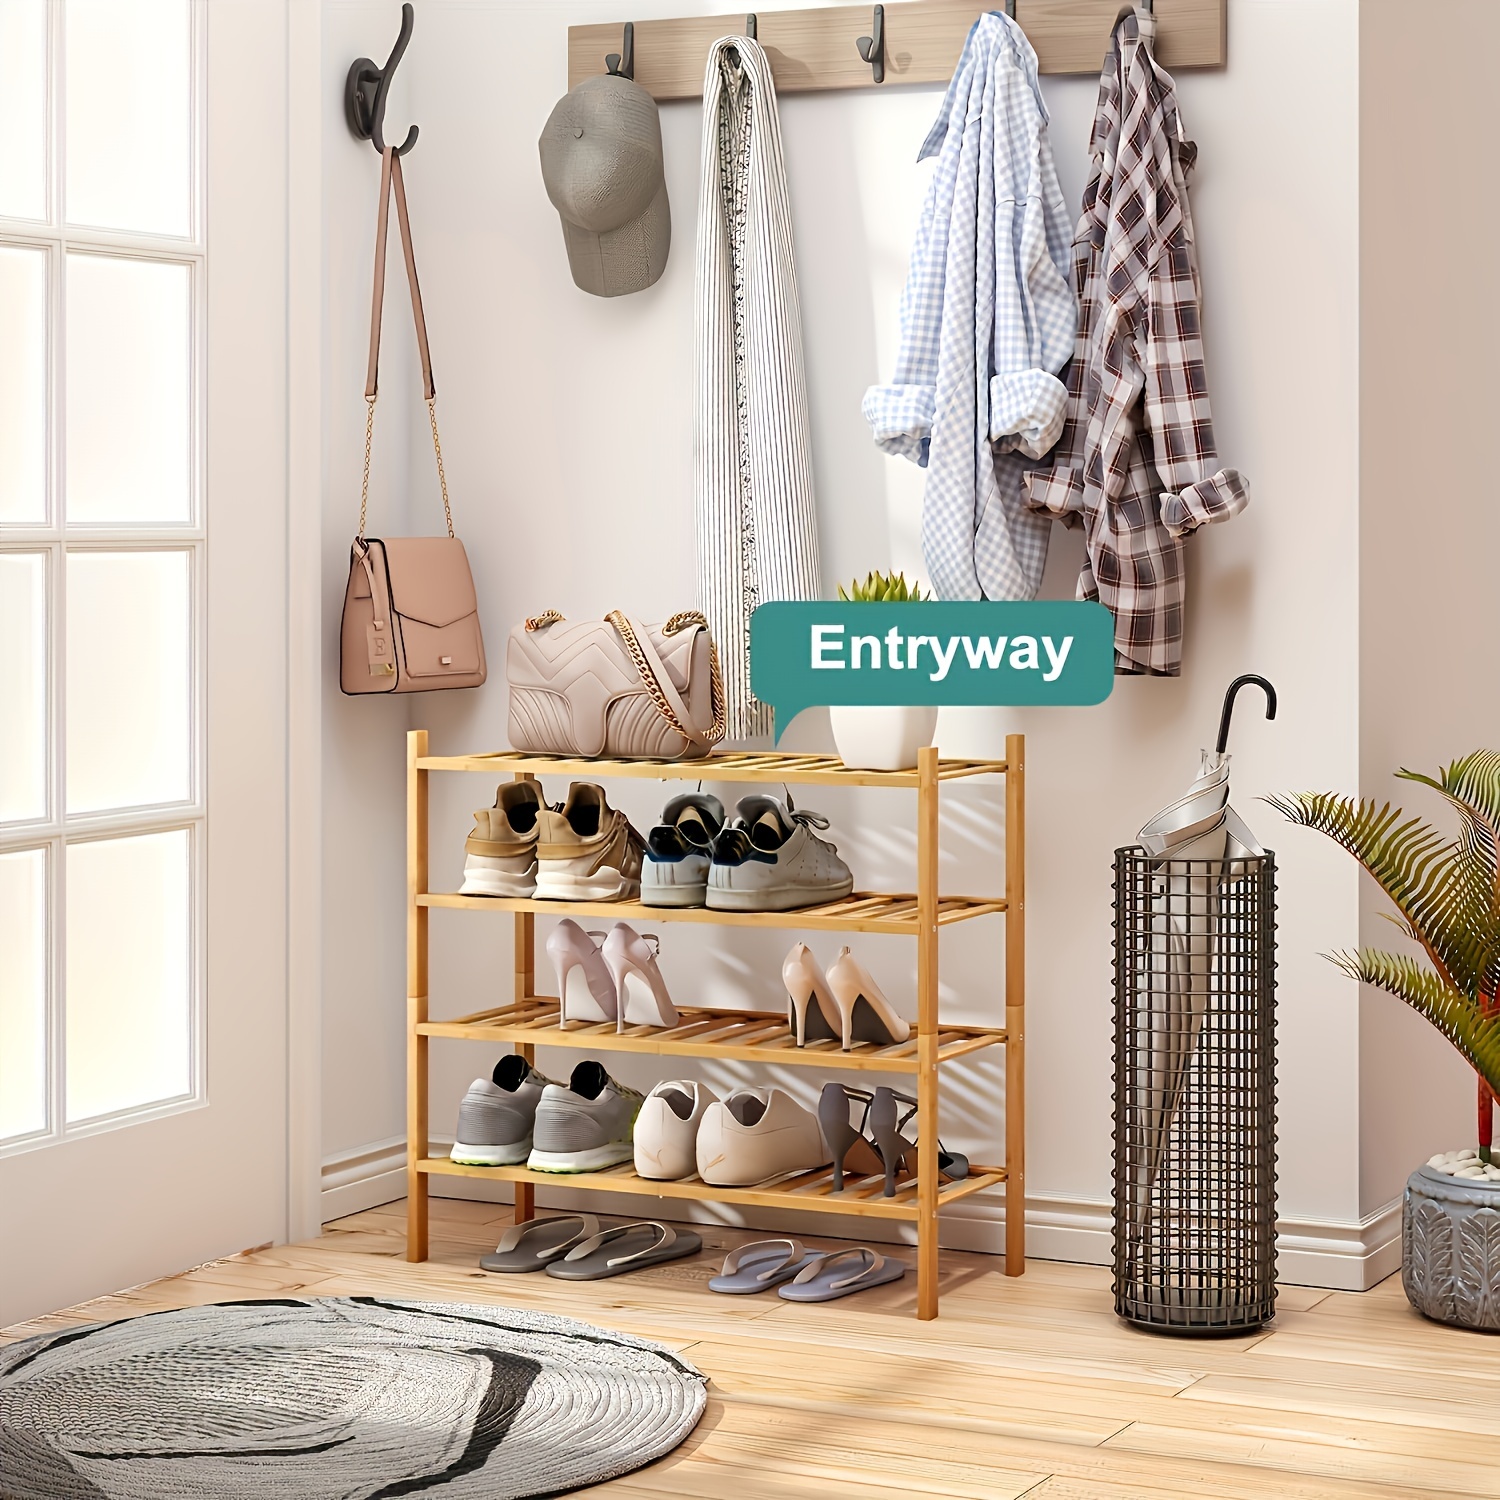 Shoe Rack for Closet, Stackable Shoes Rack Organizer Free Standing Shoe  Shelf for Entryway and Closet Hallway, Multifunctional Bamboo Rack 